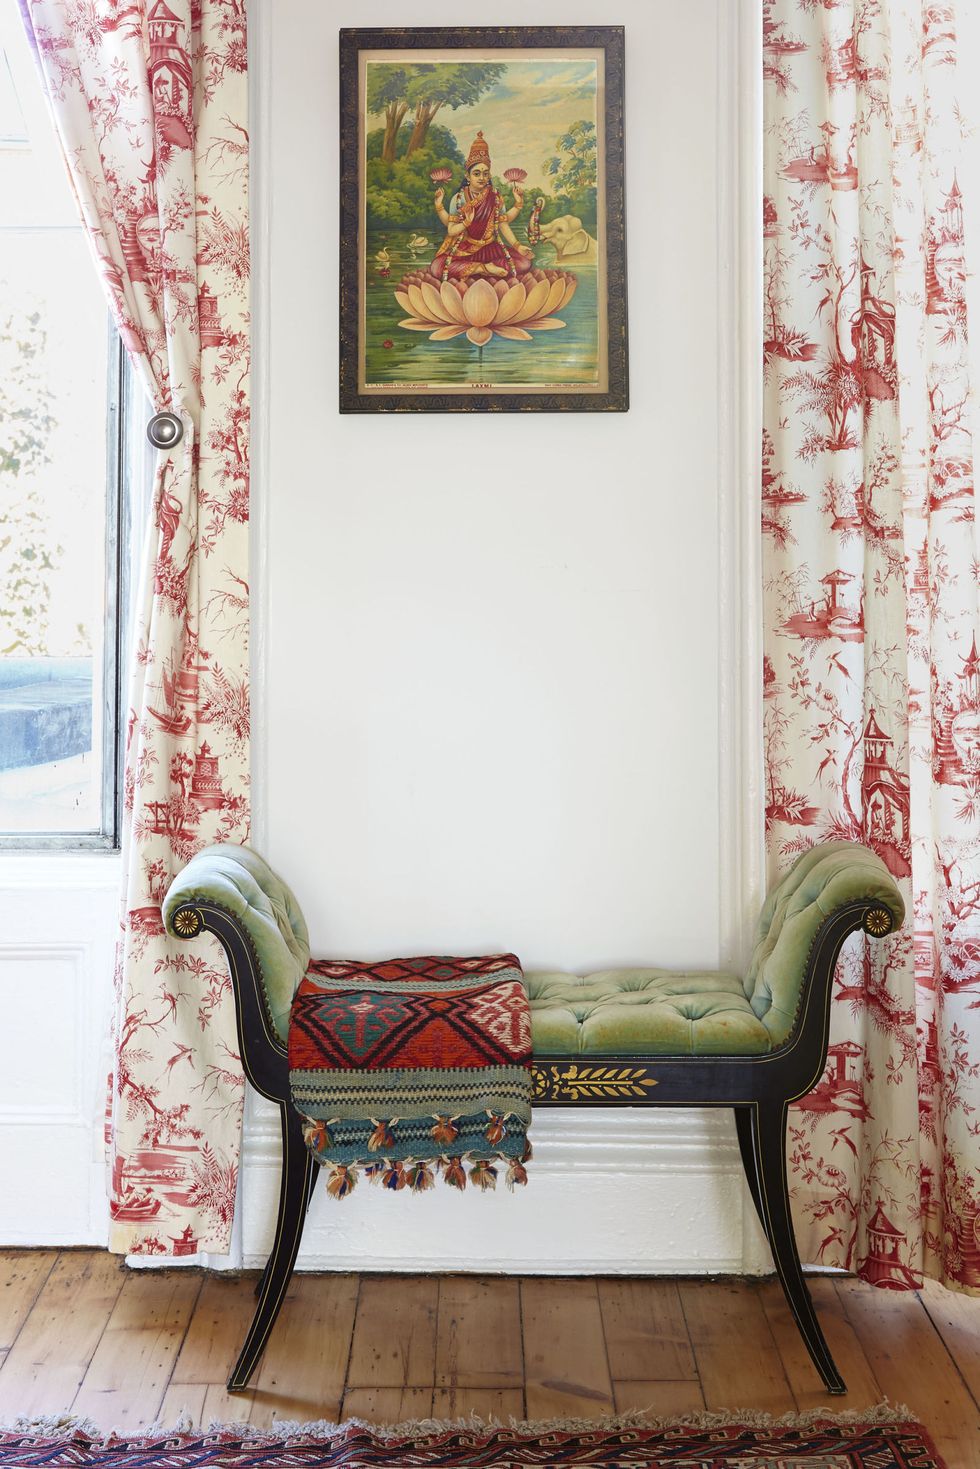 <p>The secret to this trick is not limiting yourself to one design style. Pair modern pieces with traditional ones, Asian touches with rustic fabrics. The effect is fresh and makes a room feel special. Here, Albano combined toile drapes, a Southwestern rug, an Indian painting, and a Victorian velvet bench. "They all harmonize because one item doesn't outshine the others," she says.</p>

<p><strong data-redactor-tag="strong" data-verified="redactor">RELATED: </strong><strong data-redactor-tag="strong" data-verified="redactor"><a href="http://www.redbookmag.com/home/a40695/genius-hacks-for-packing-your-suitcase/" target="_blank" data-tracking-id="recirc-text-link">20 Genius Space-Saving Hacks for Packing Your Suitcase</a></strong></p>